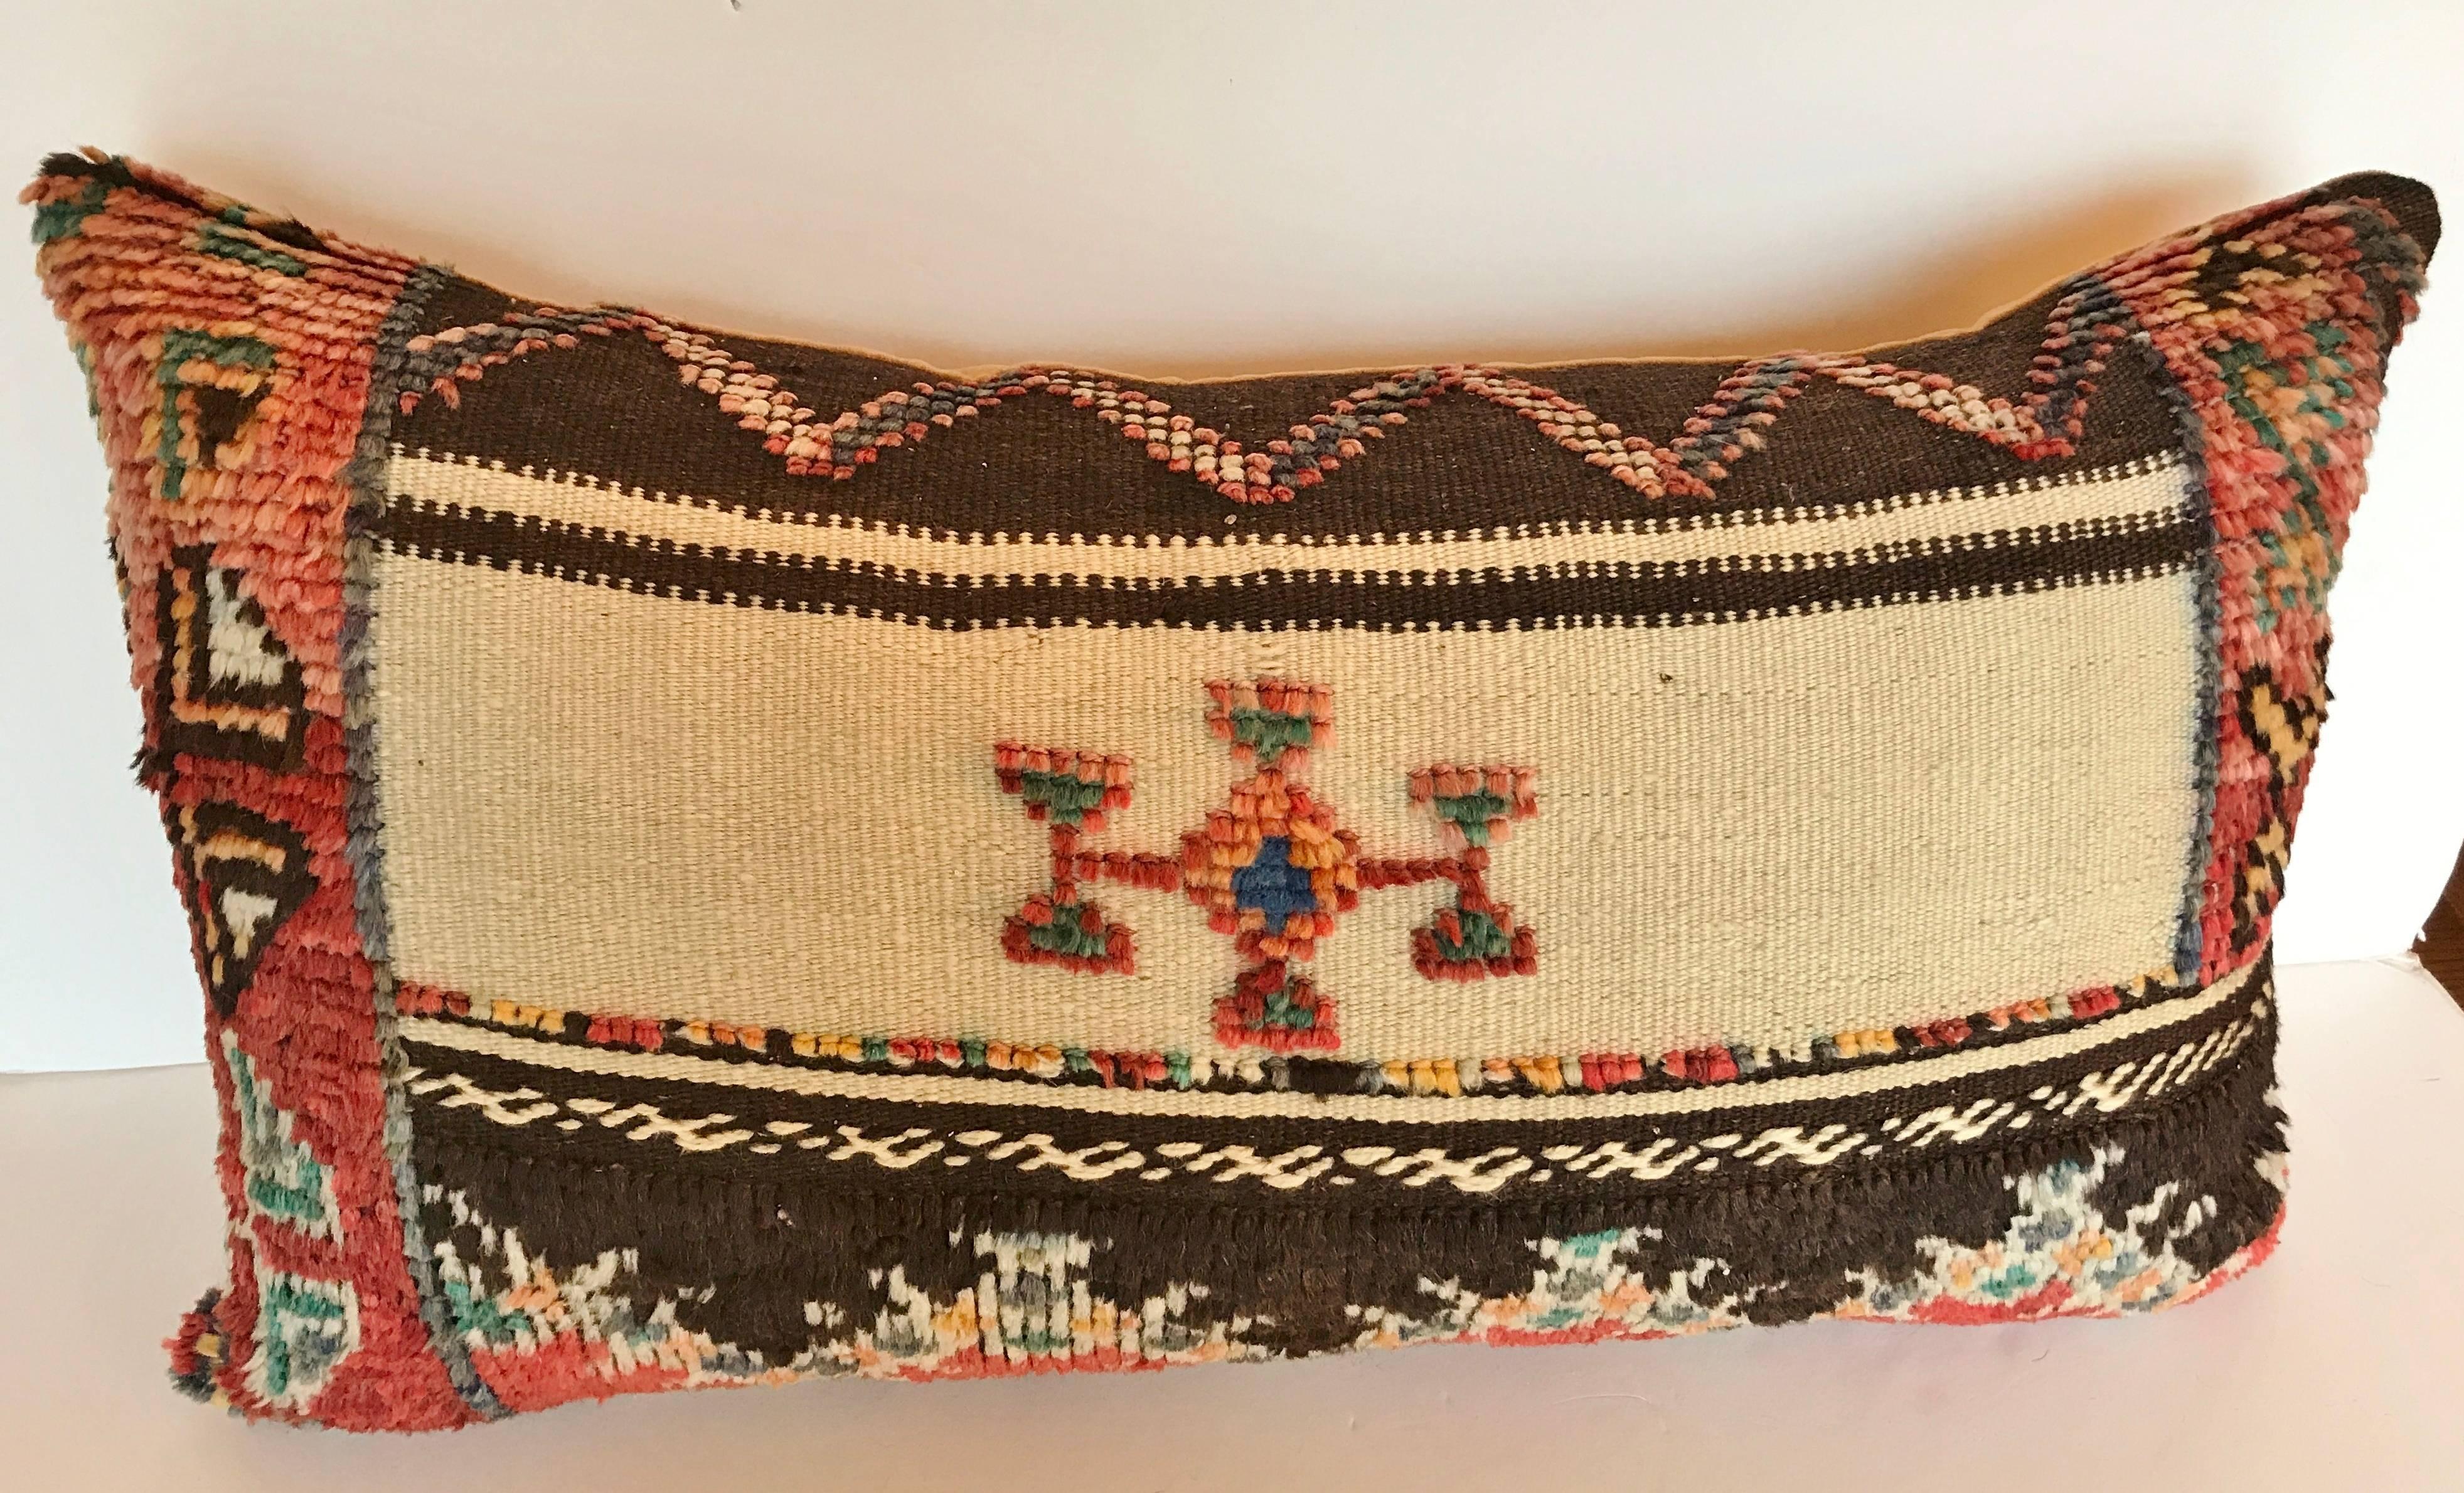 Custom pillow cut from a vintage hand loomed wool Moroccan rug made by the Berber tribes of the Atlas Mountains.  Wool is soft and lustrous with natural dyes.  The flat weave textile is embellished with woven tufted tribal designs.  Pillow is backed